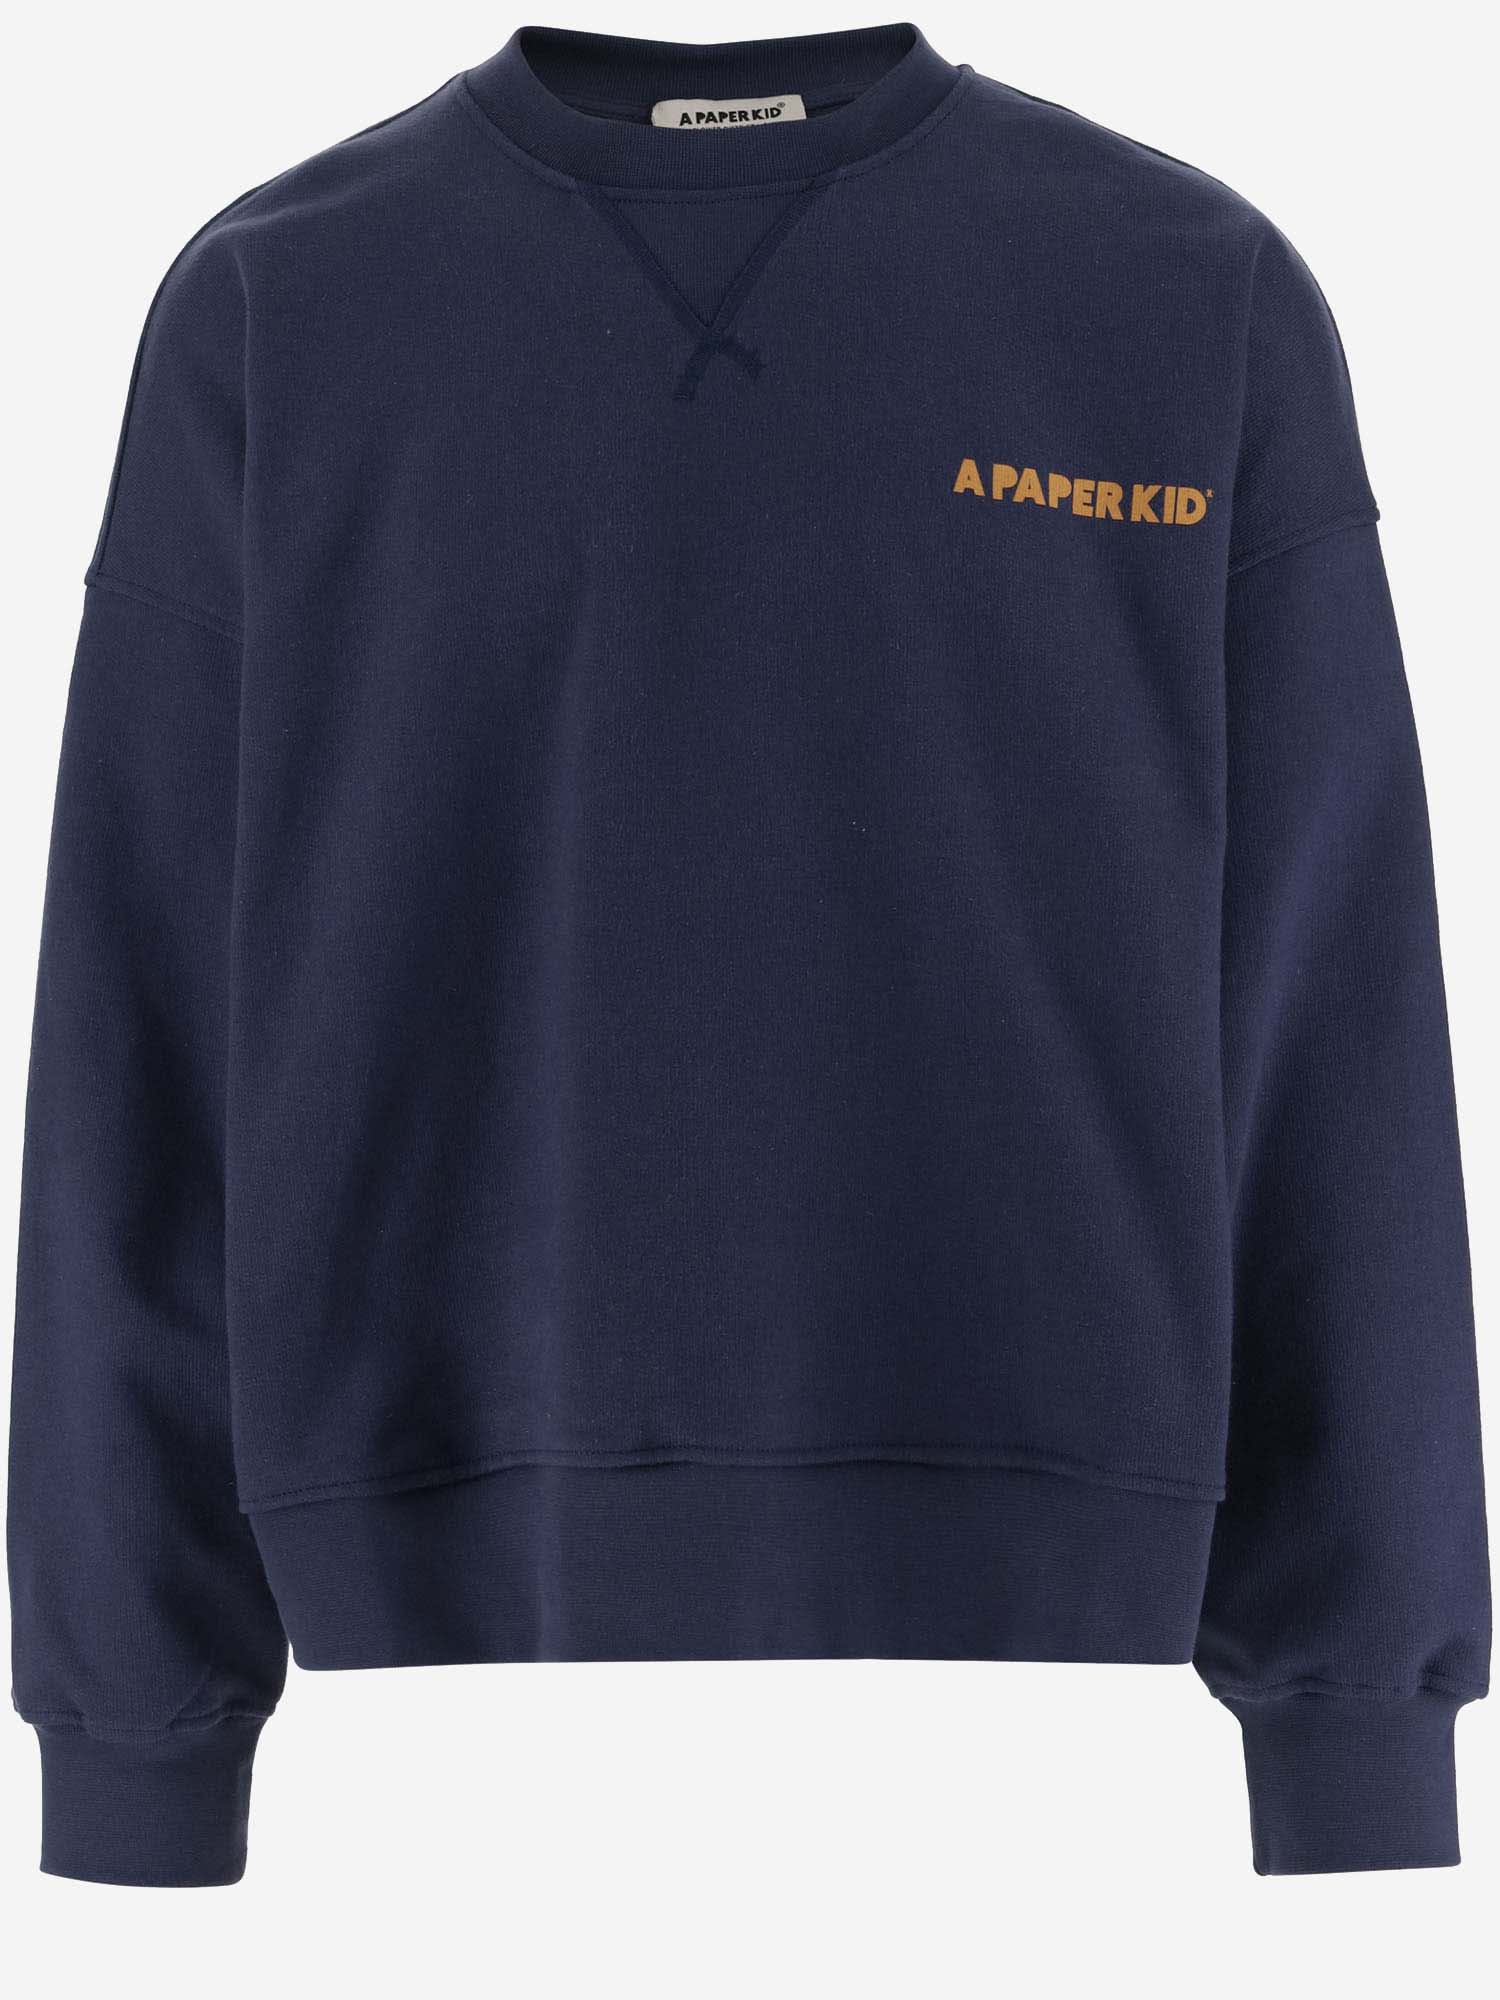 A Paper Kid Cotton Sweatshirt With Logo In Blue